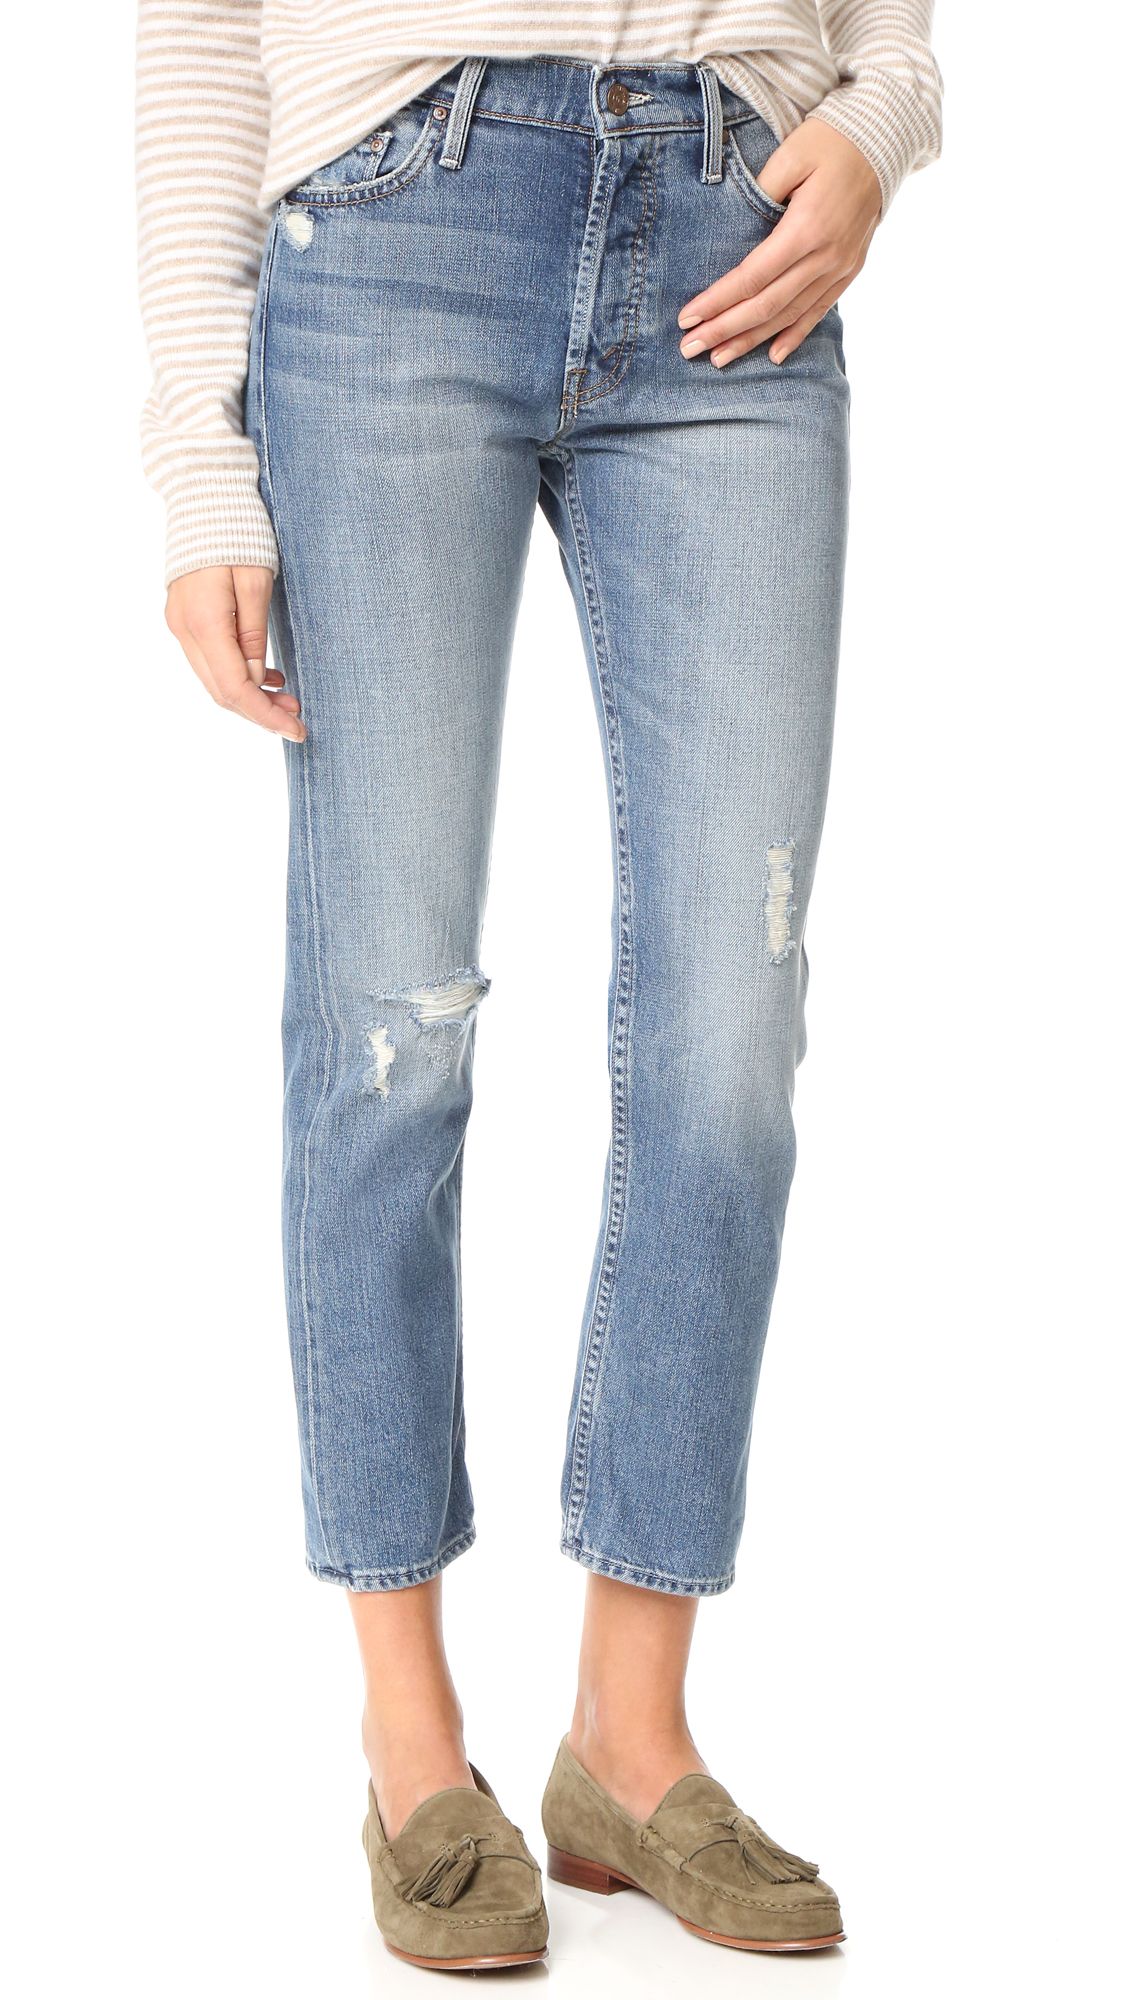 The Cheeky Jeans | Shopbop